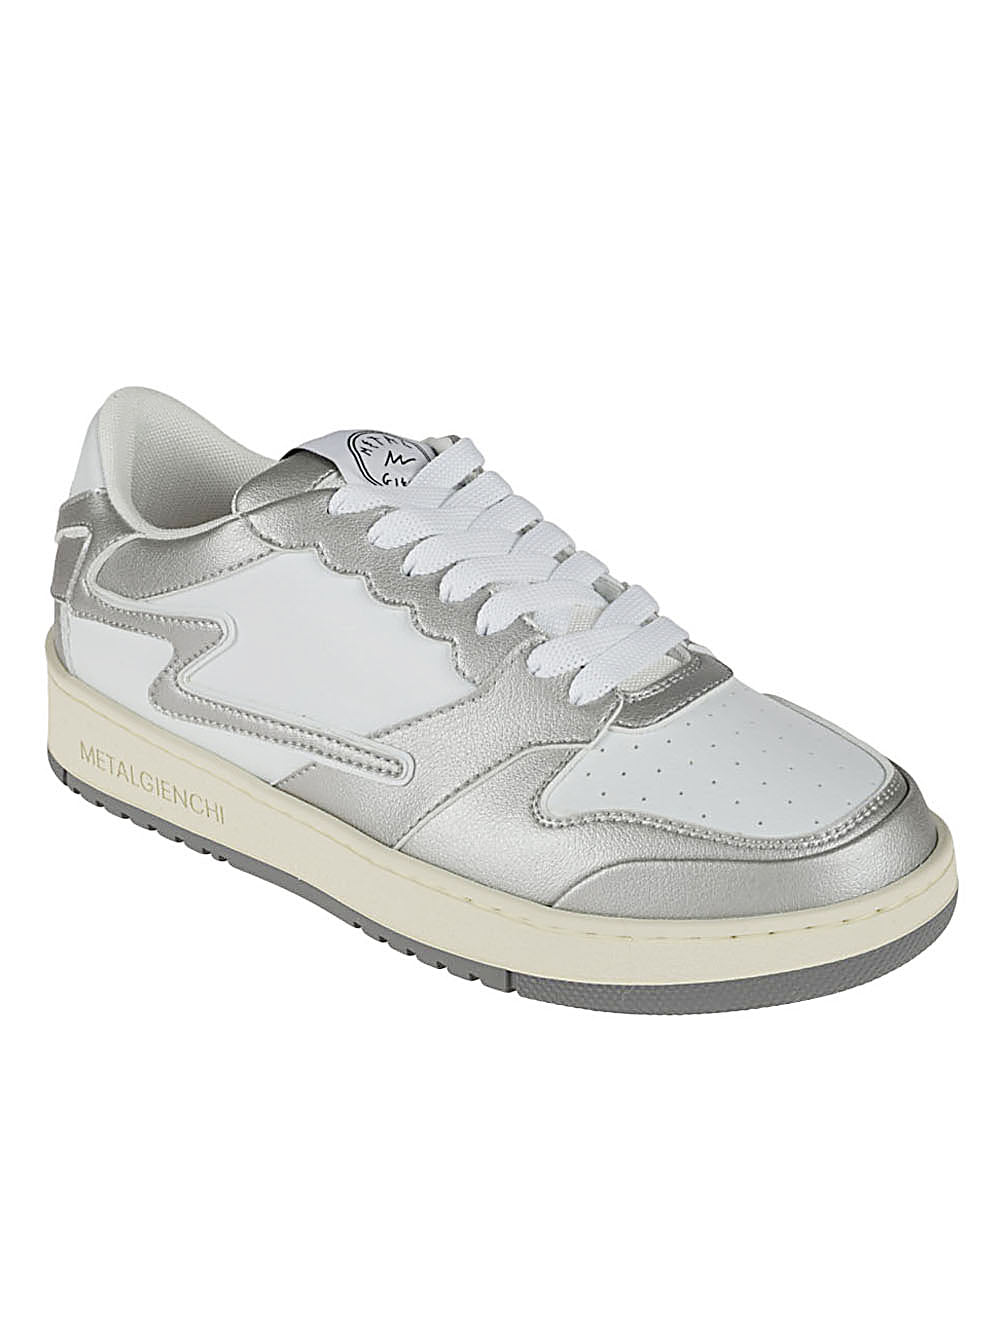 Icx low leather sneakers